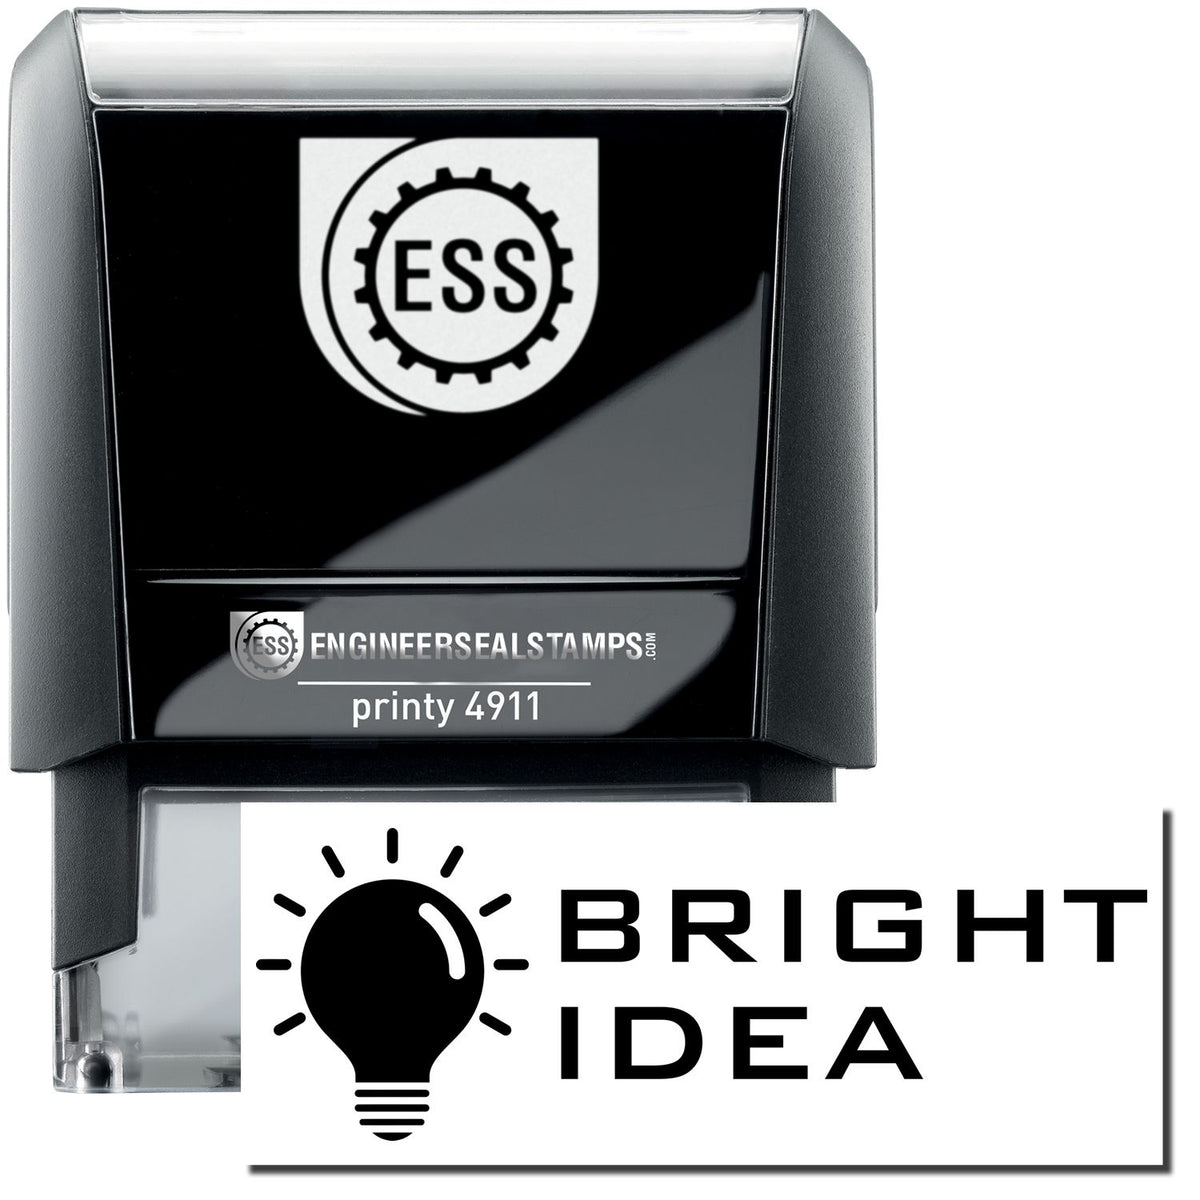 A self-inking stamp with a stamped image showing how the text &quot;BRIGHT IDEA&quot; (in a tech-style font with an image of a bright lightbulb on the left side) is displayed after stamping.